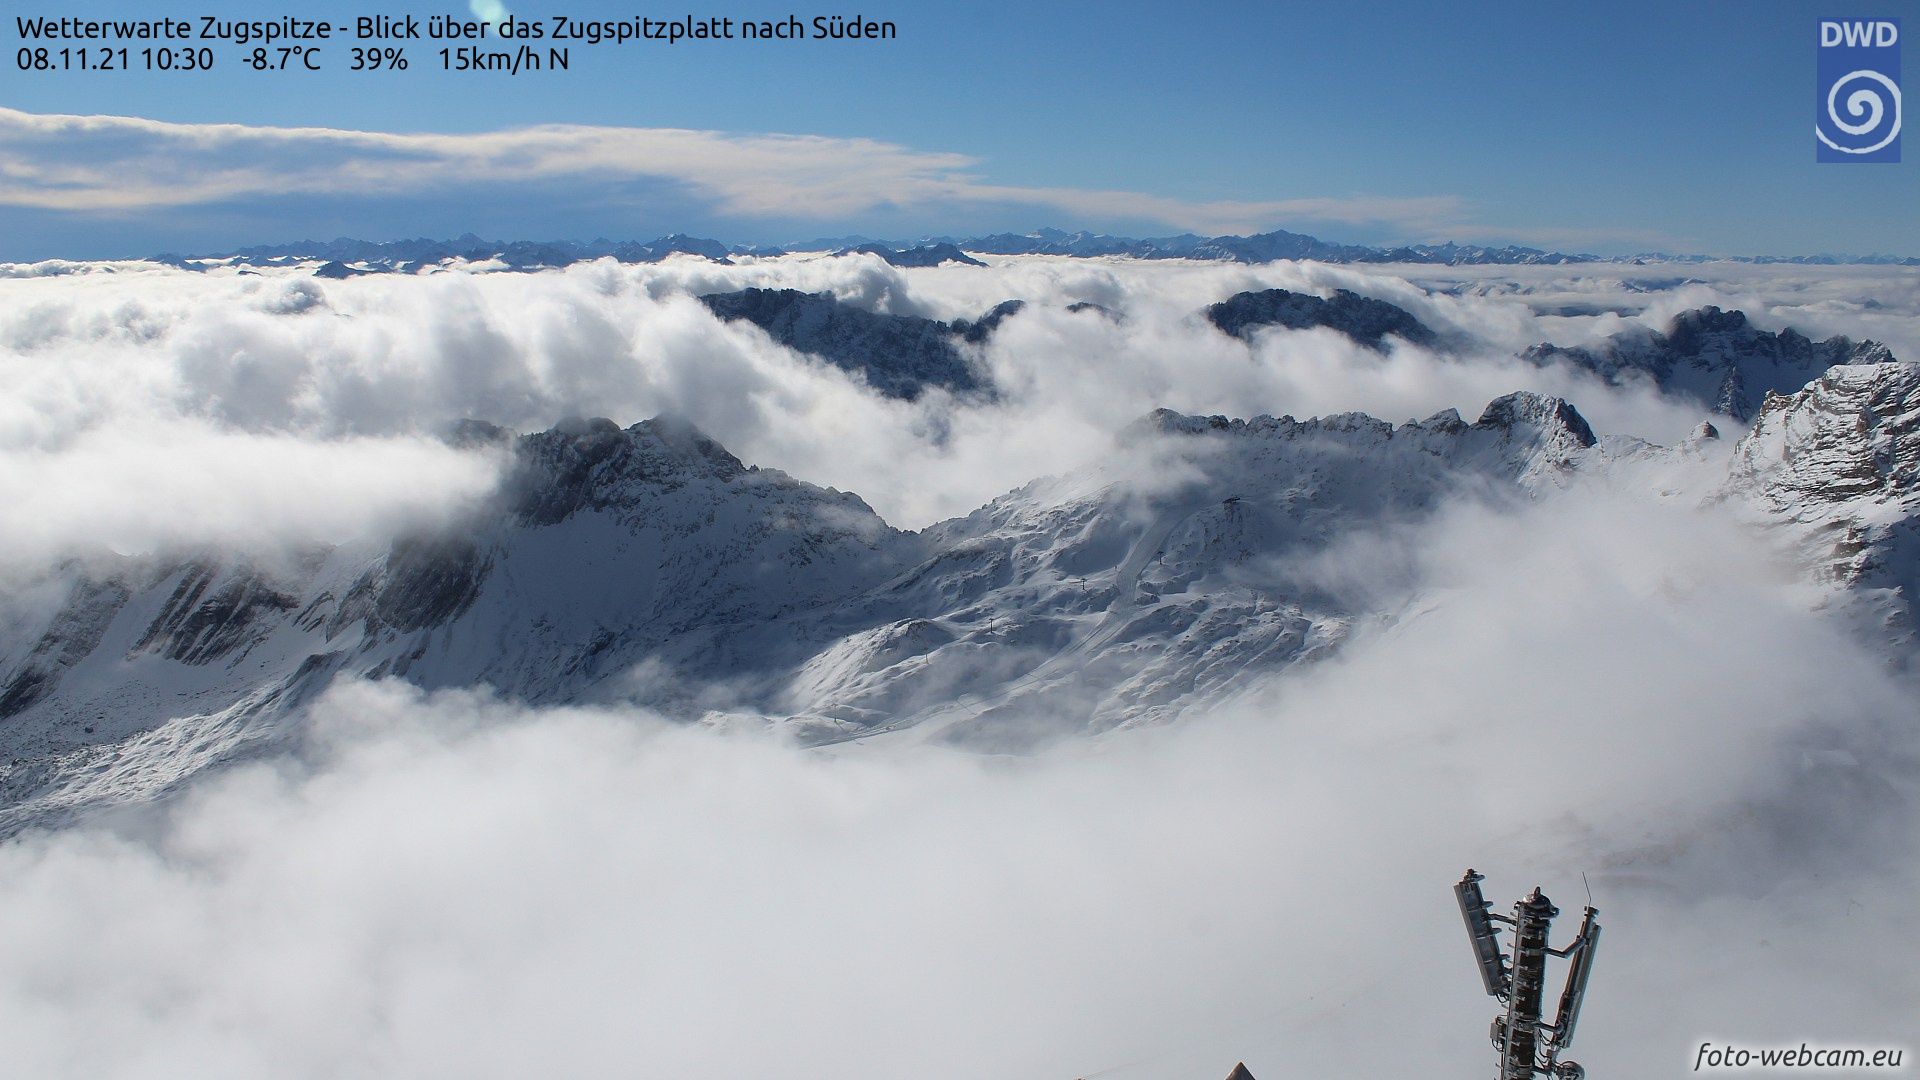 Some clouds on the north side as a result of a weak cold front, higher up still sunny (foto-webcam.eu)